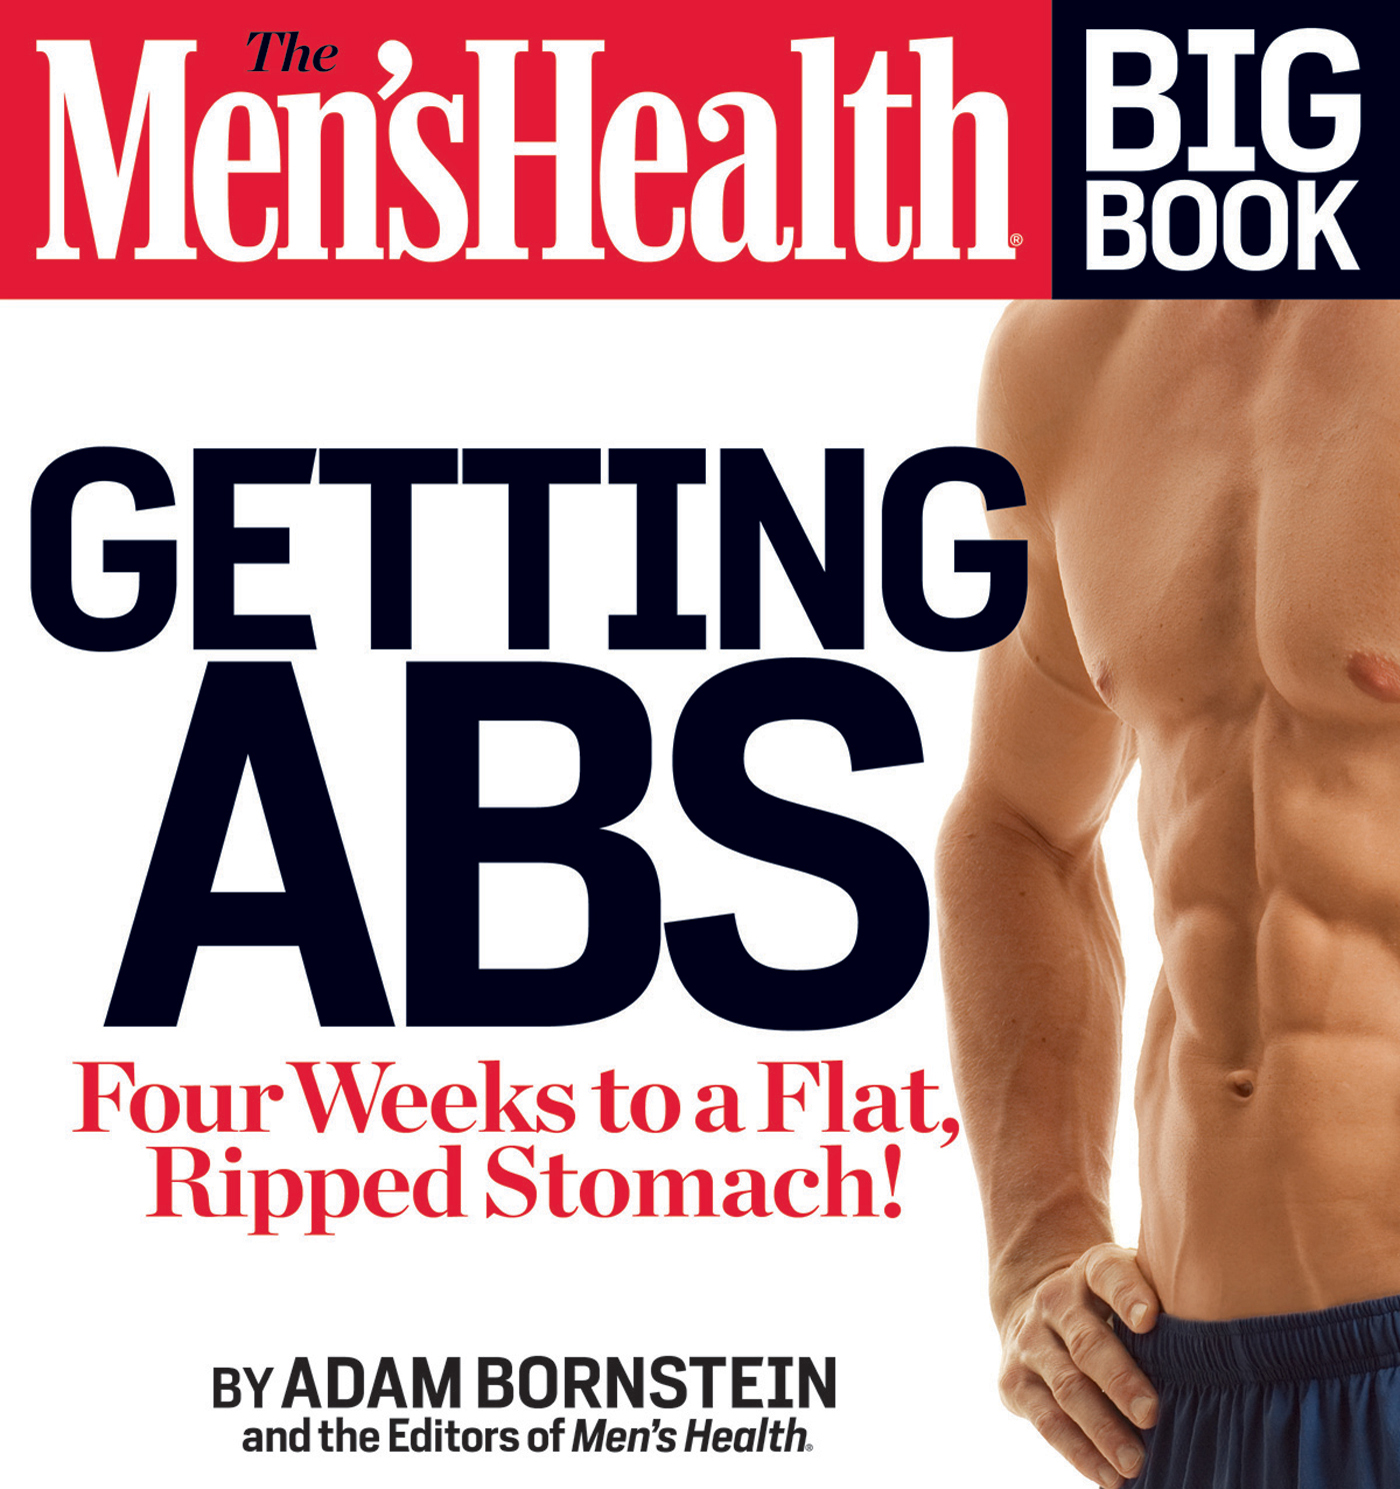 The men's health big book. Getting abs : [four weeks to flat, ripped stomach!] cover image